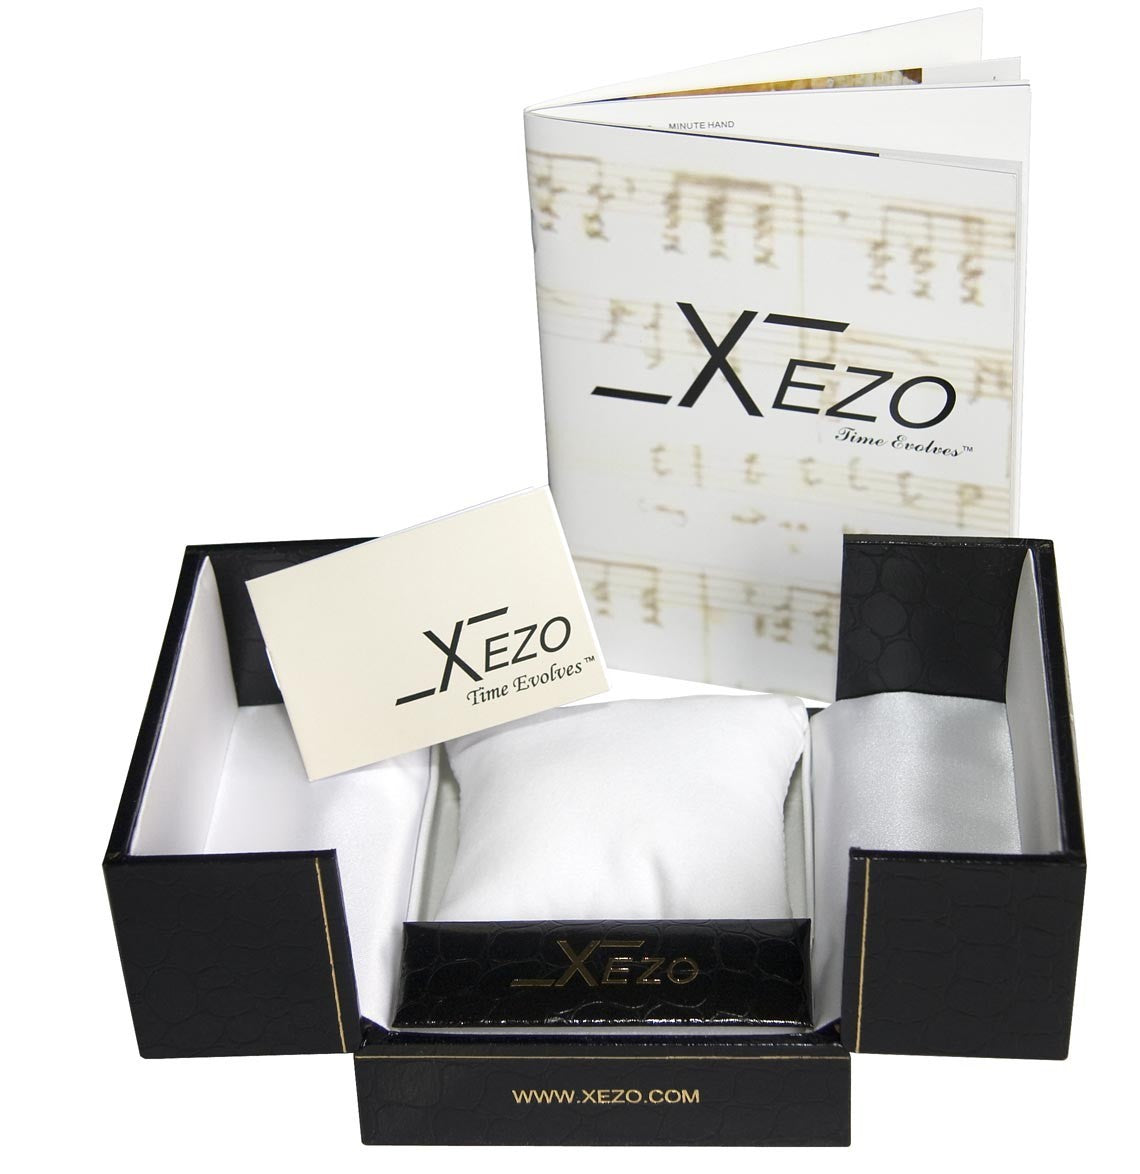 Xezo - Black gift box, certificate, and manual of the Air Commando D45-BU watch